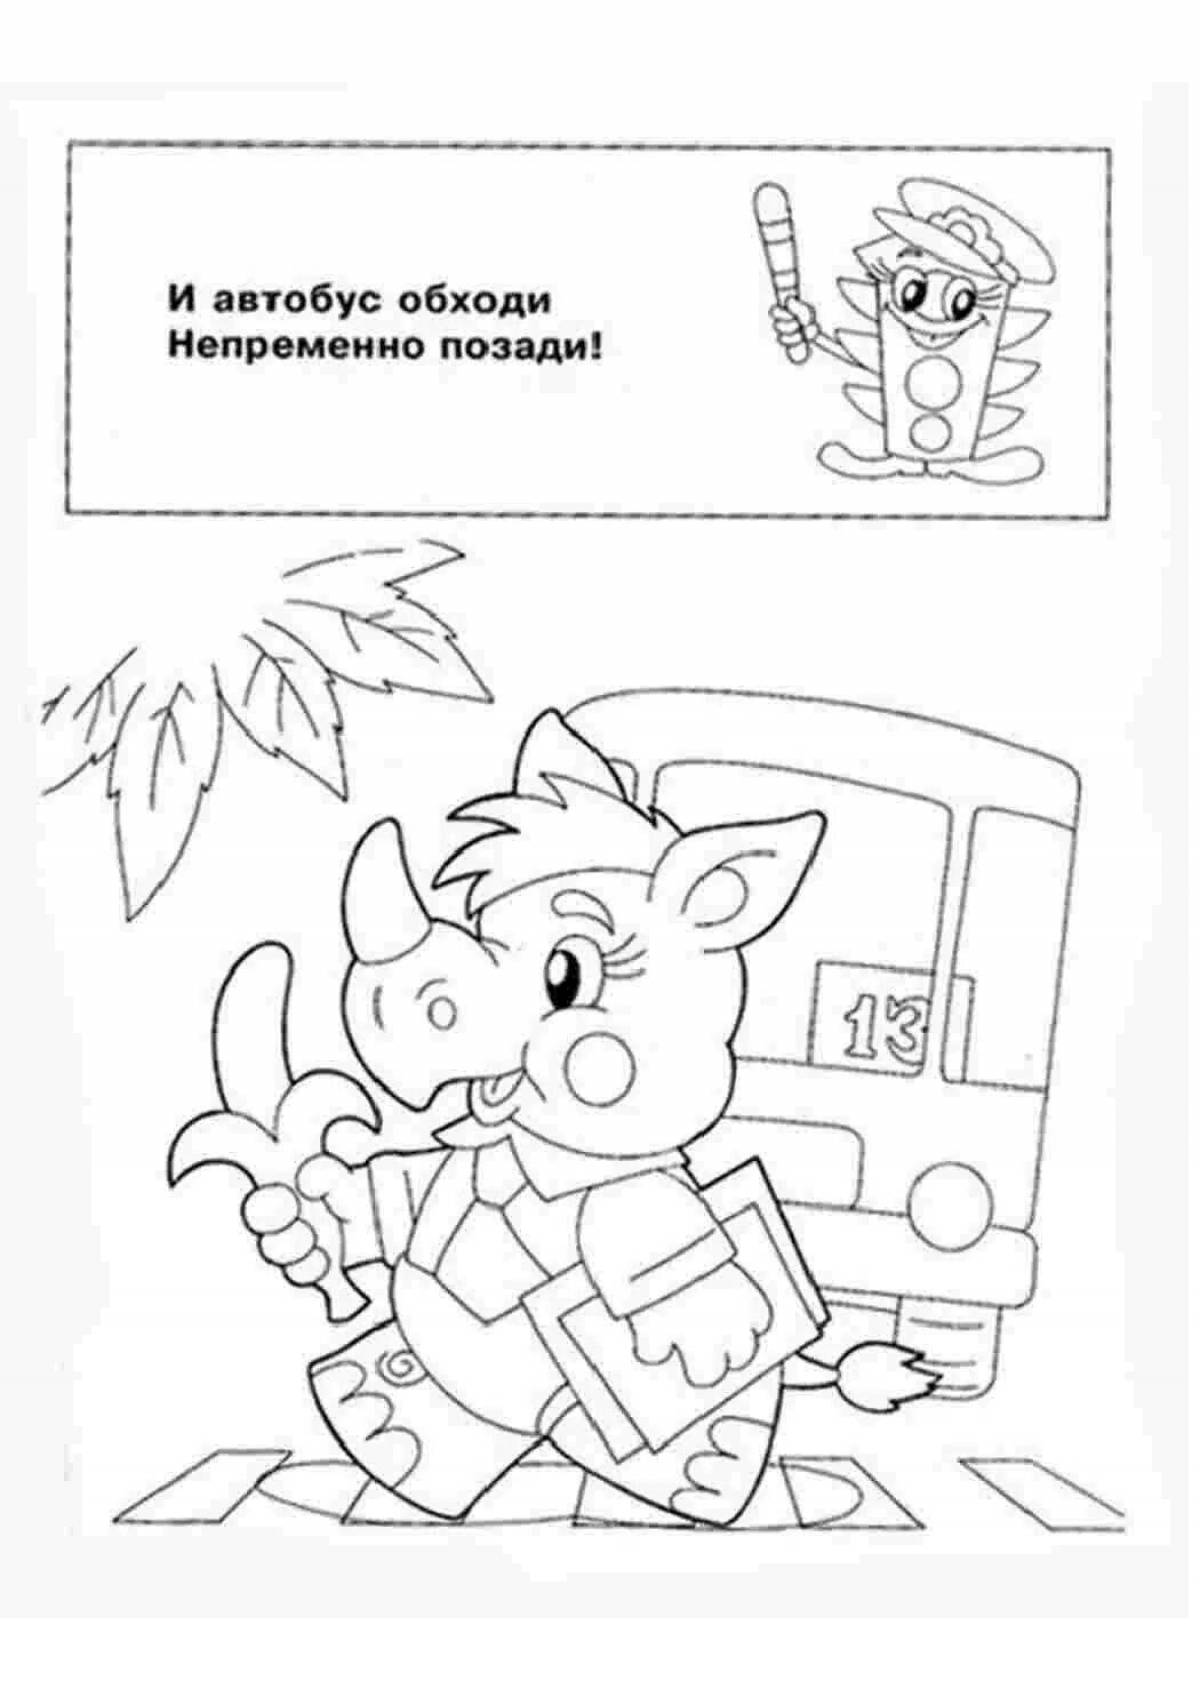 Playful safety alphabet coloring page for kids